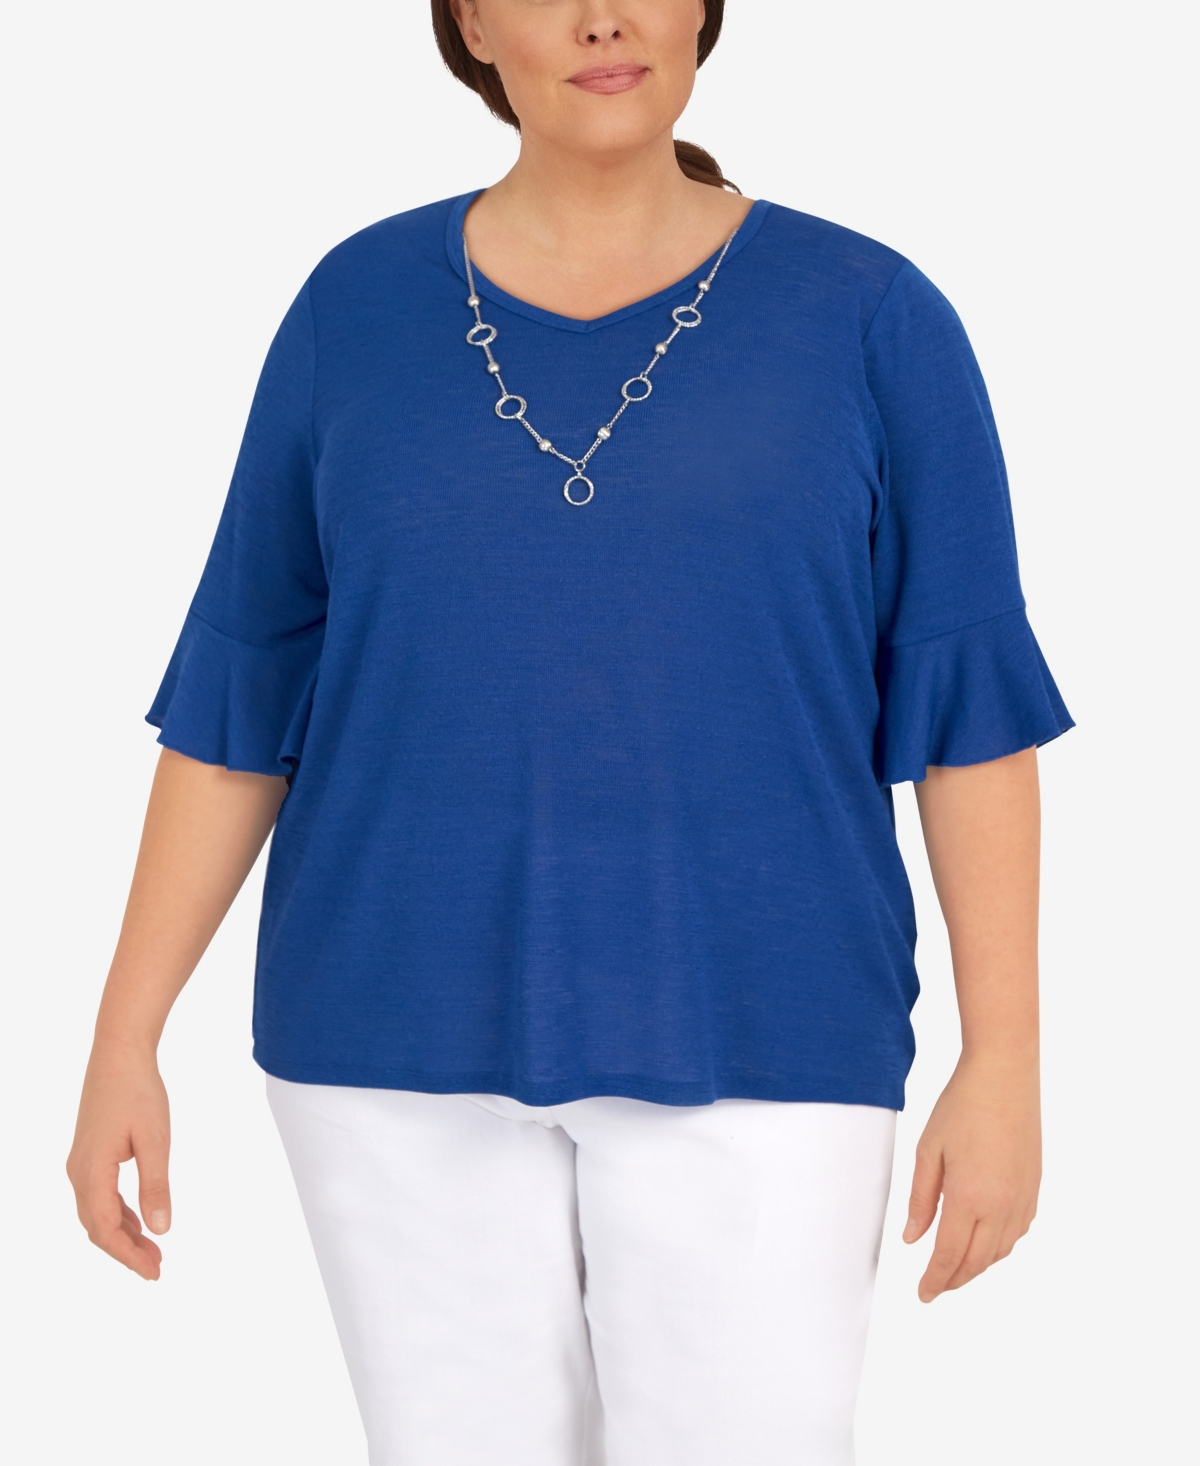 Alfred Dunner Plus Size Cool Vibrations Soft Fit Three Quarter Sleeve Top with Detachable Necklace